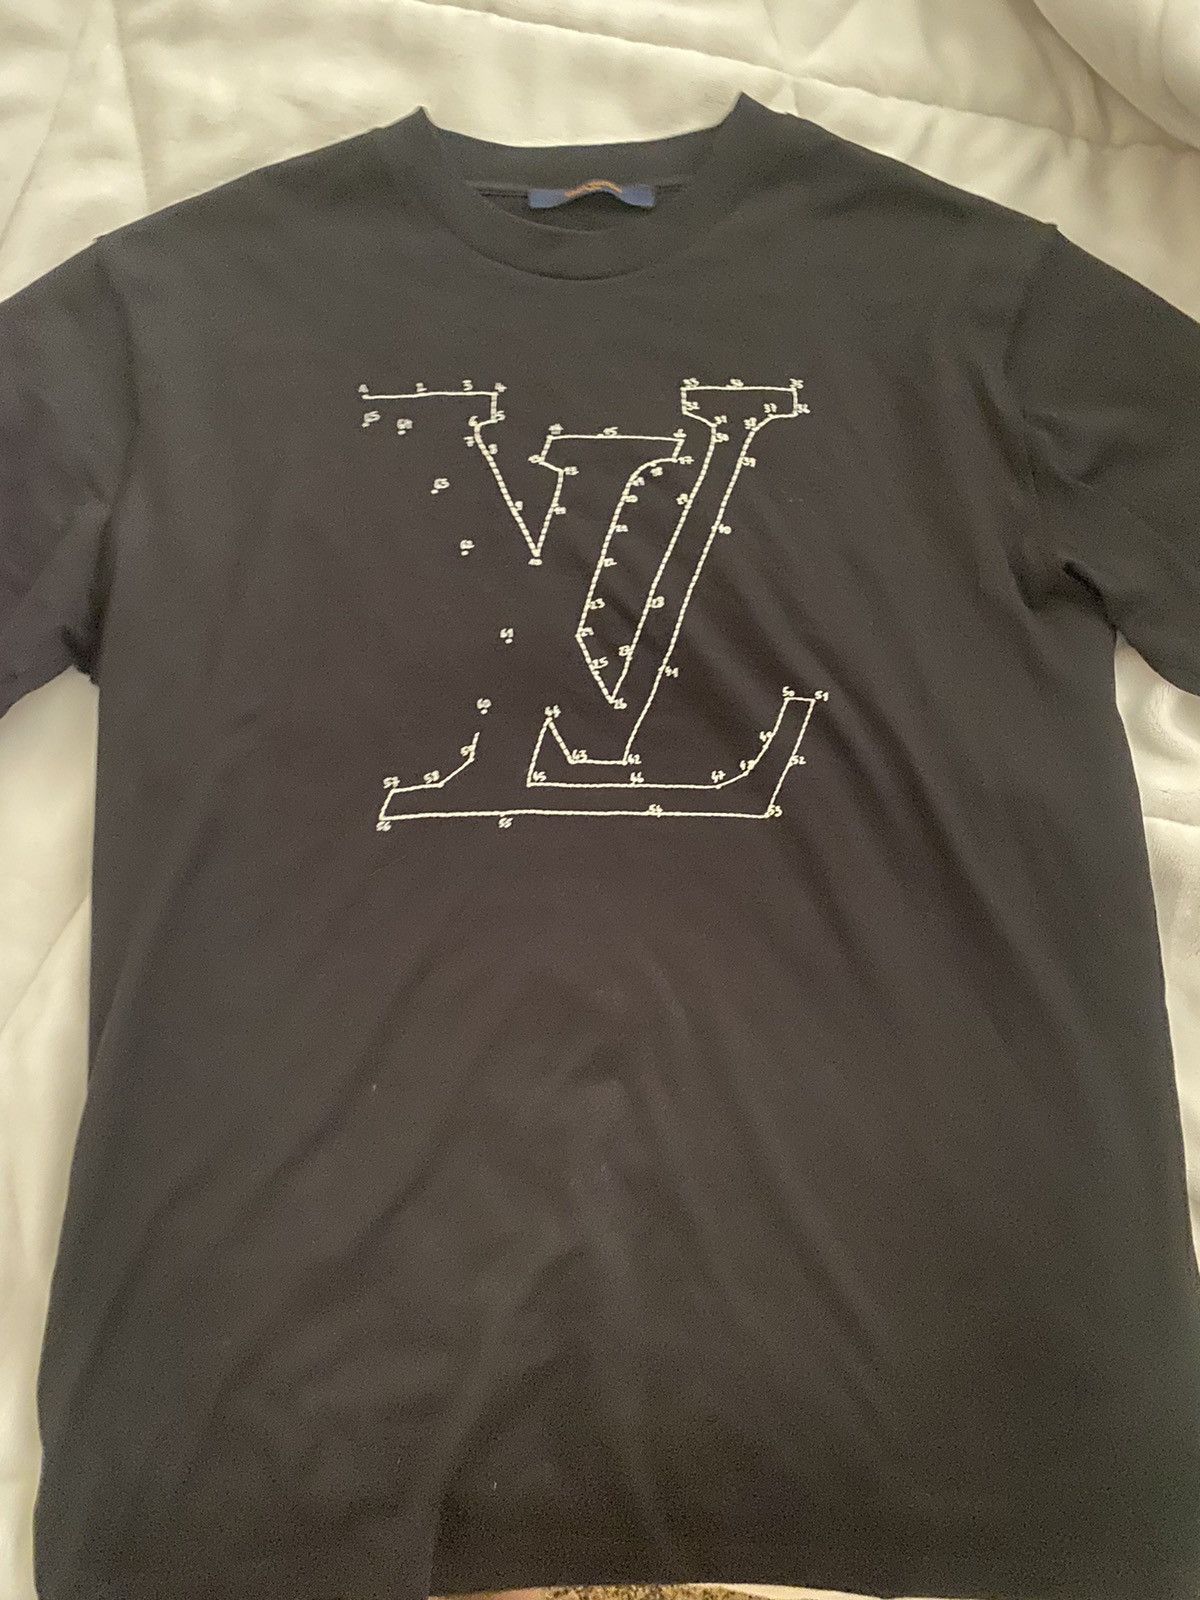 Louis Vuitton Stitch Print and Embroidered T-Shirt